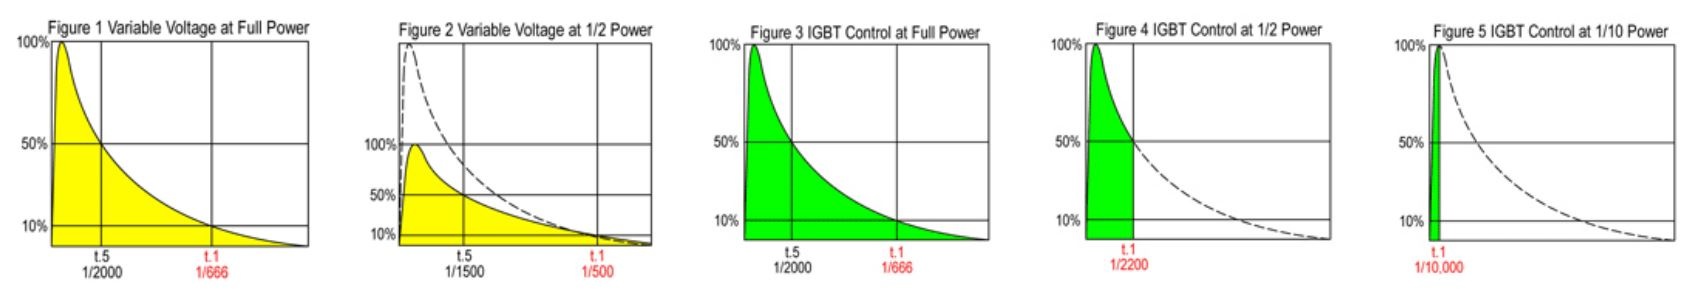 Variable voltage control of flashpower